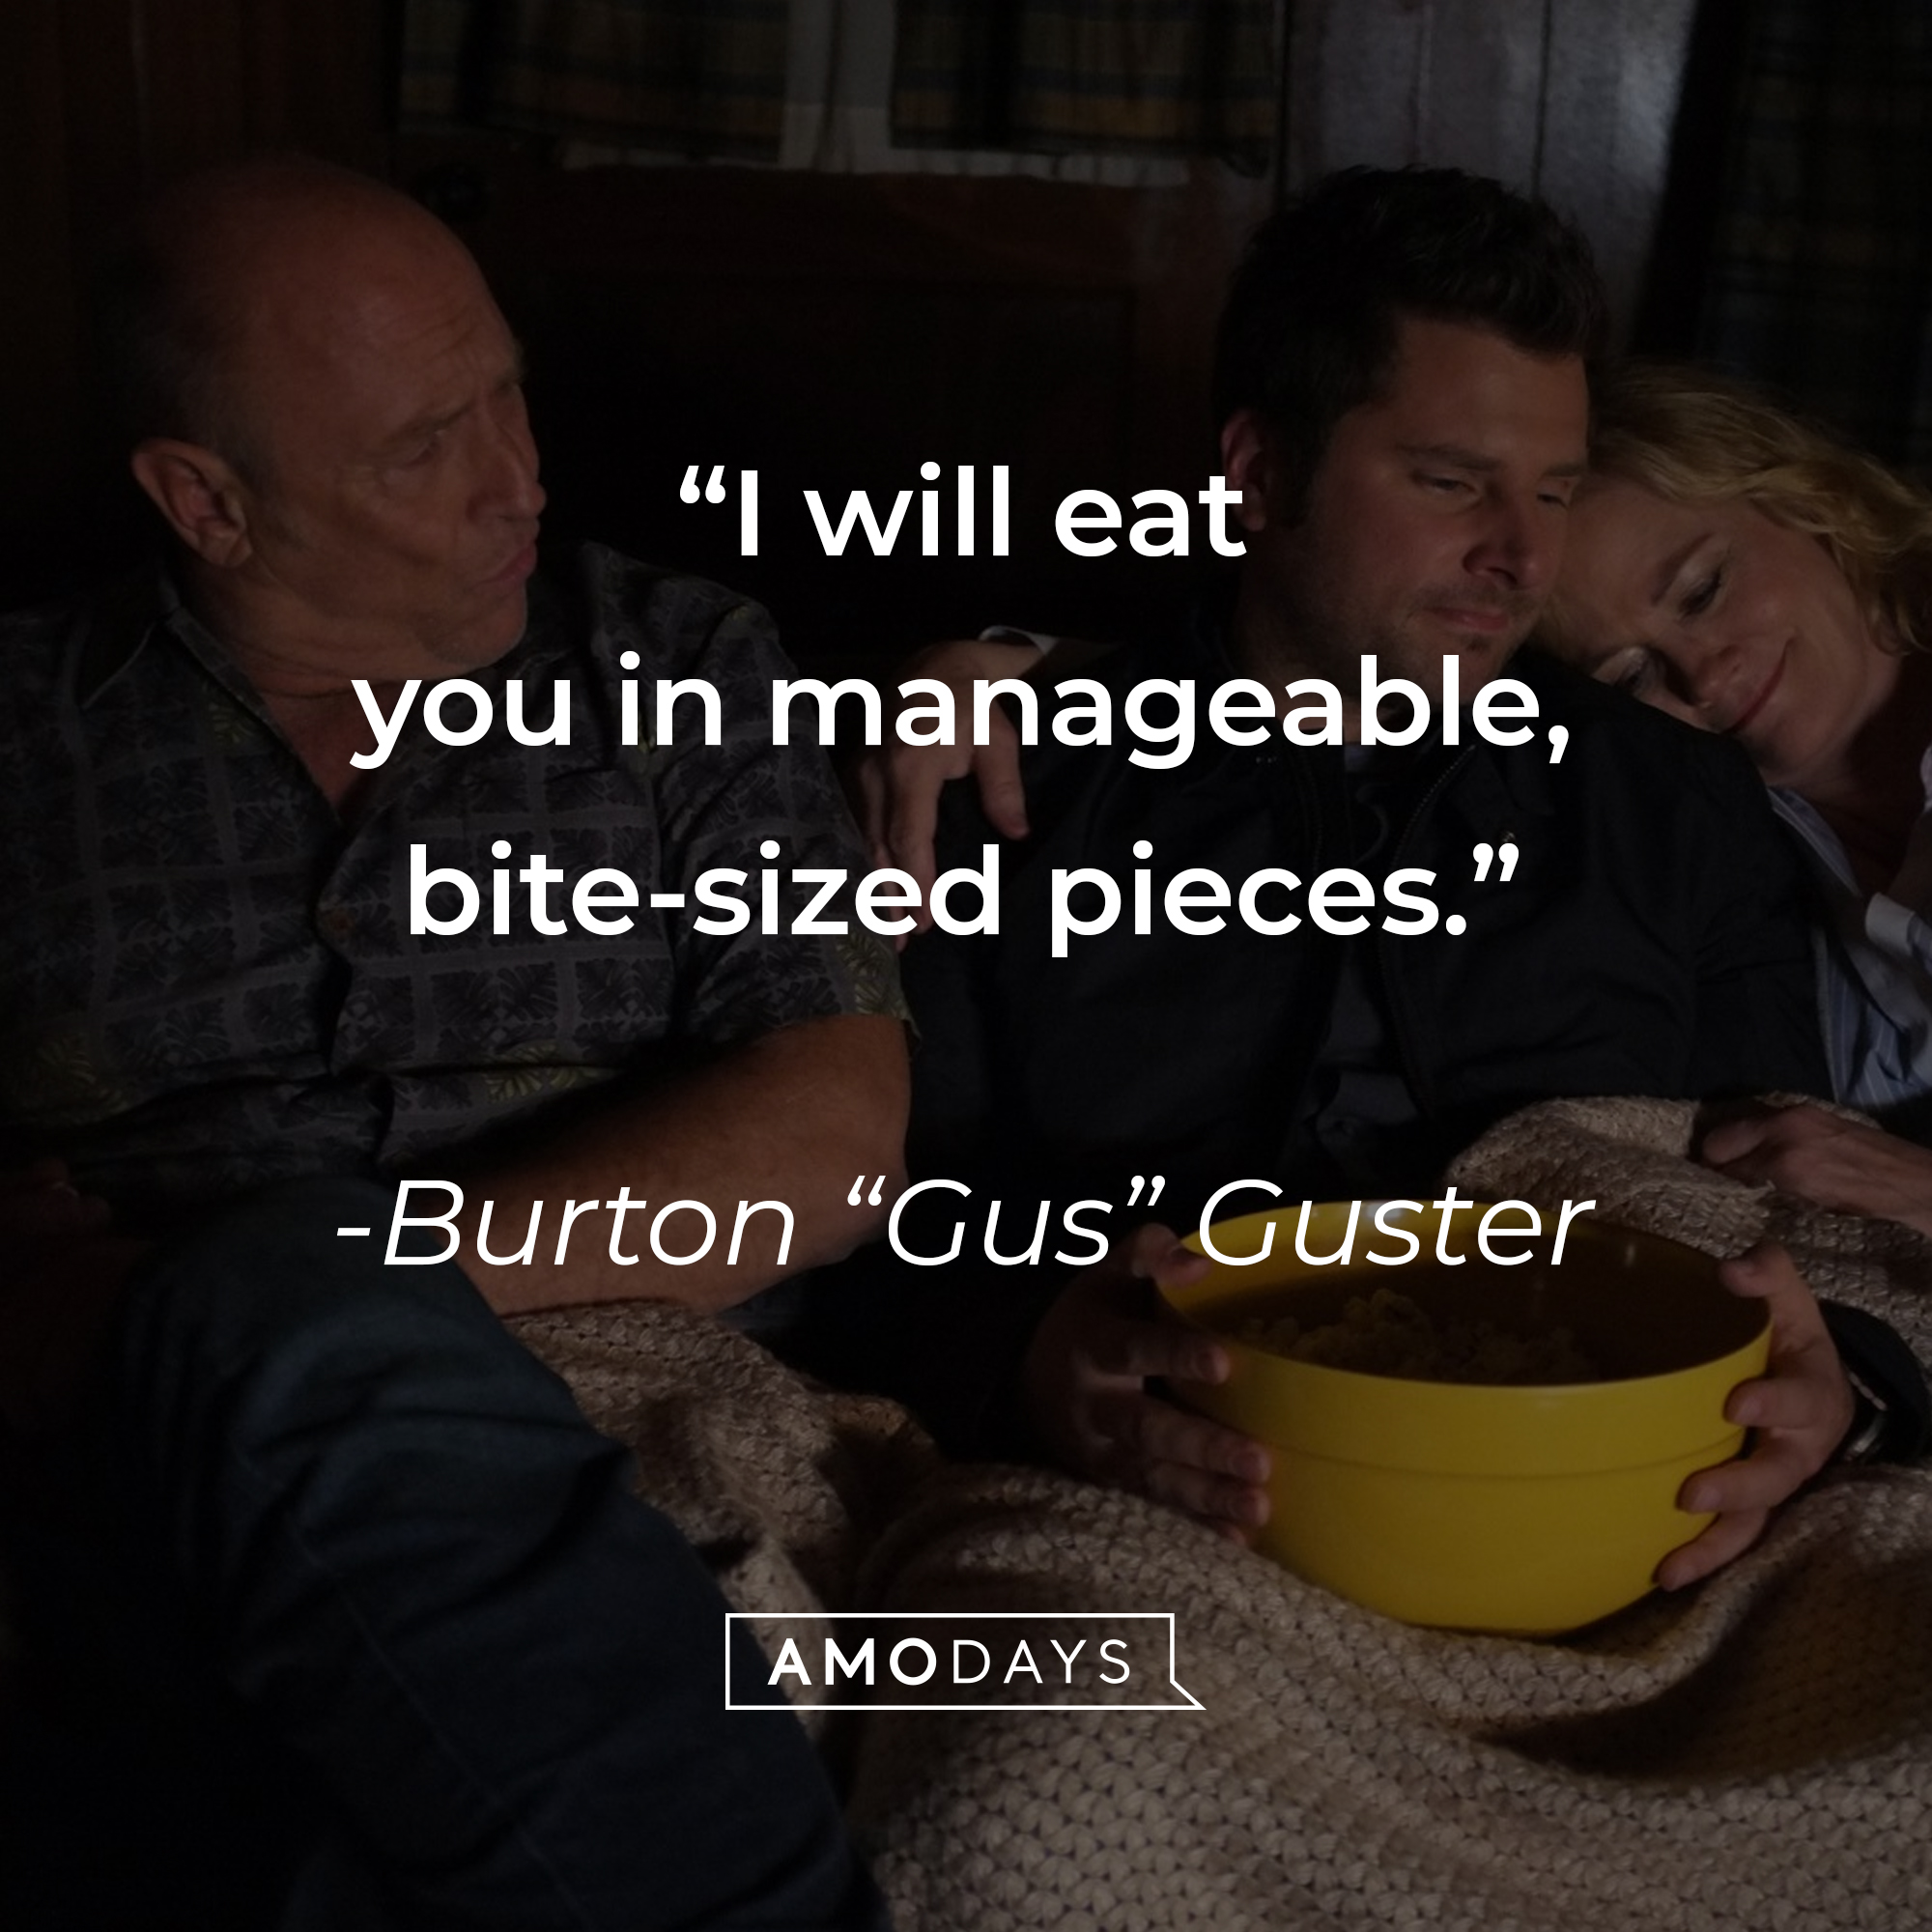 Shawn Spencer and two other characters, with  Burton “Gus” Guster’s quote: “I will eat you in manageable, bite-sized pieces.”  | Source: facebook.com/PsychPeacock